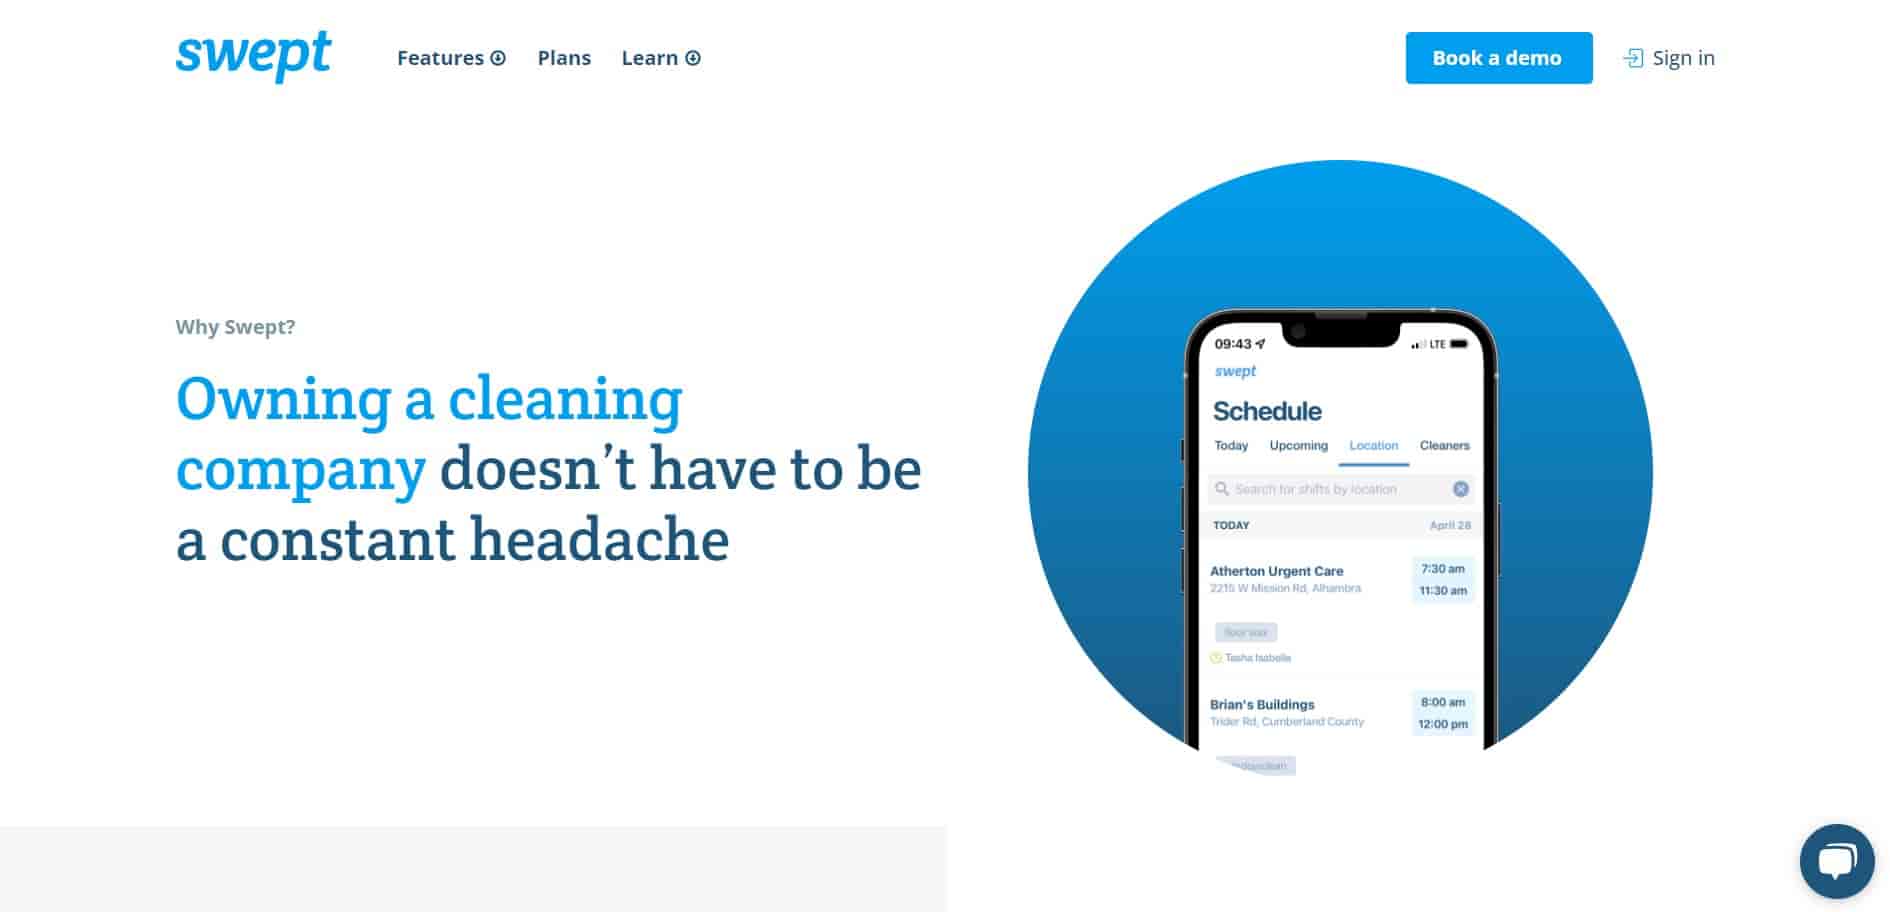 Image of Swept homepage which is a good software for cleaners.